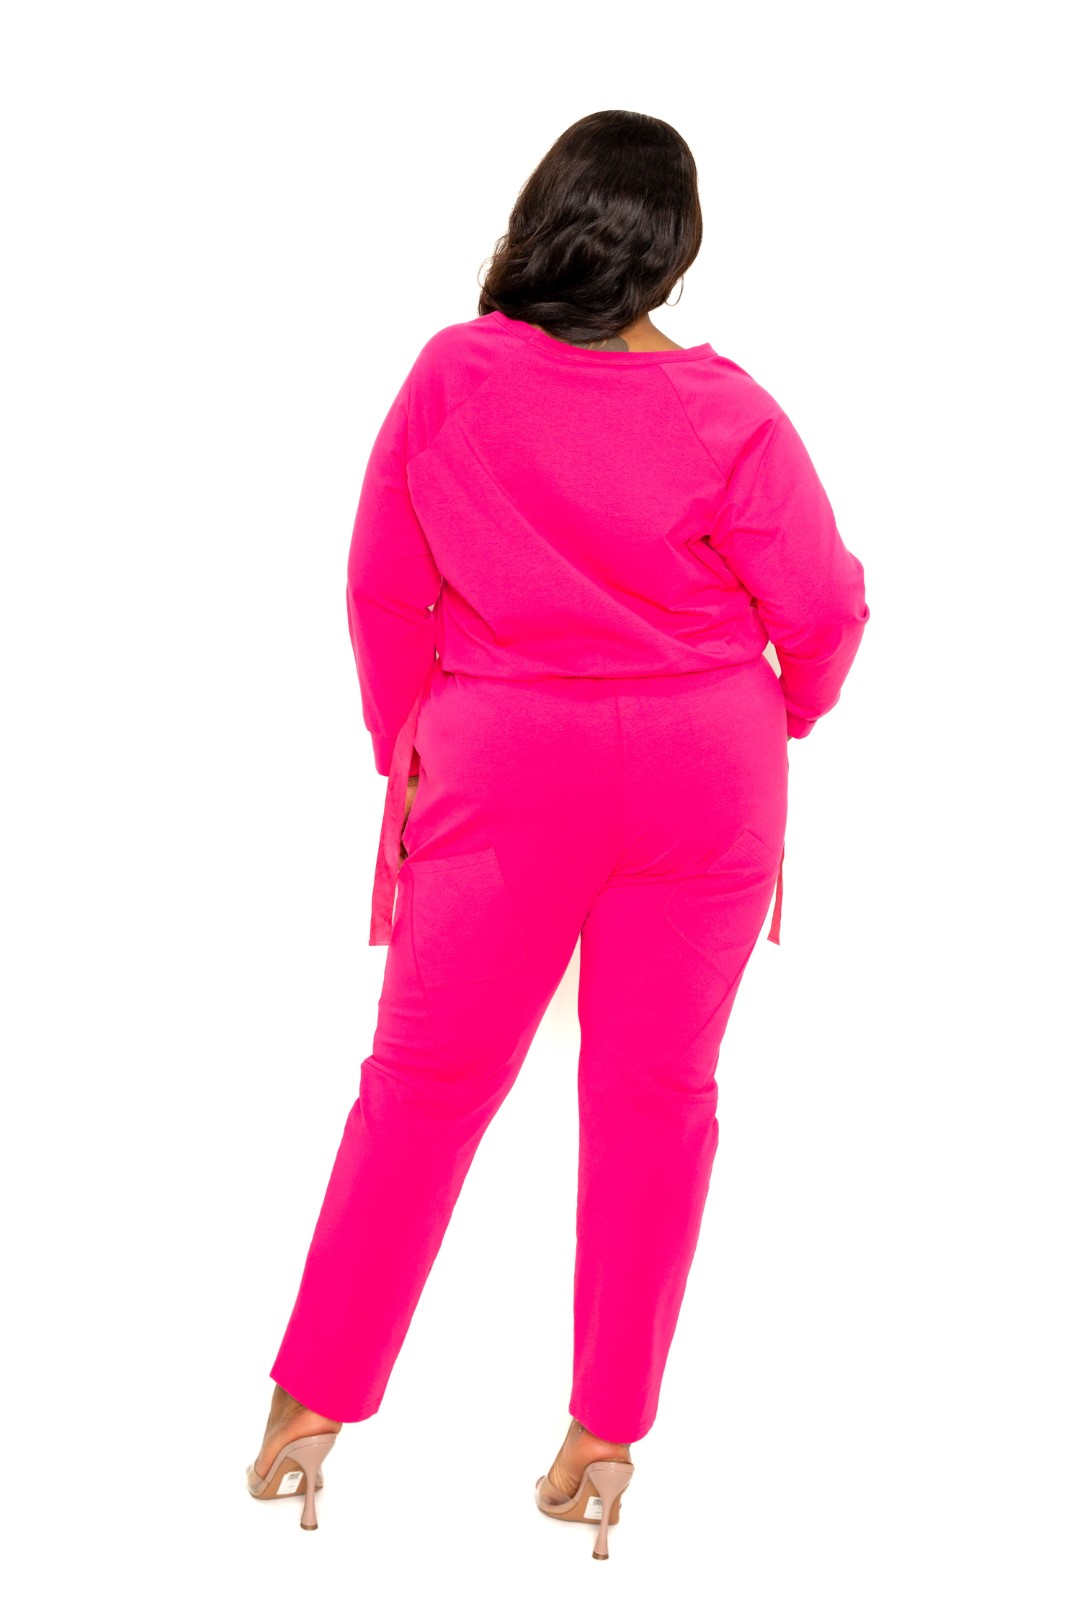 Classy Casual Hot Pink Lounge Outfit ( XL - 3X)